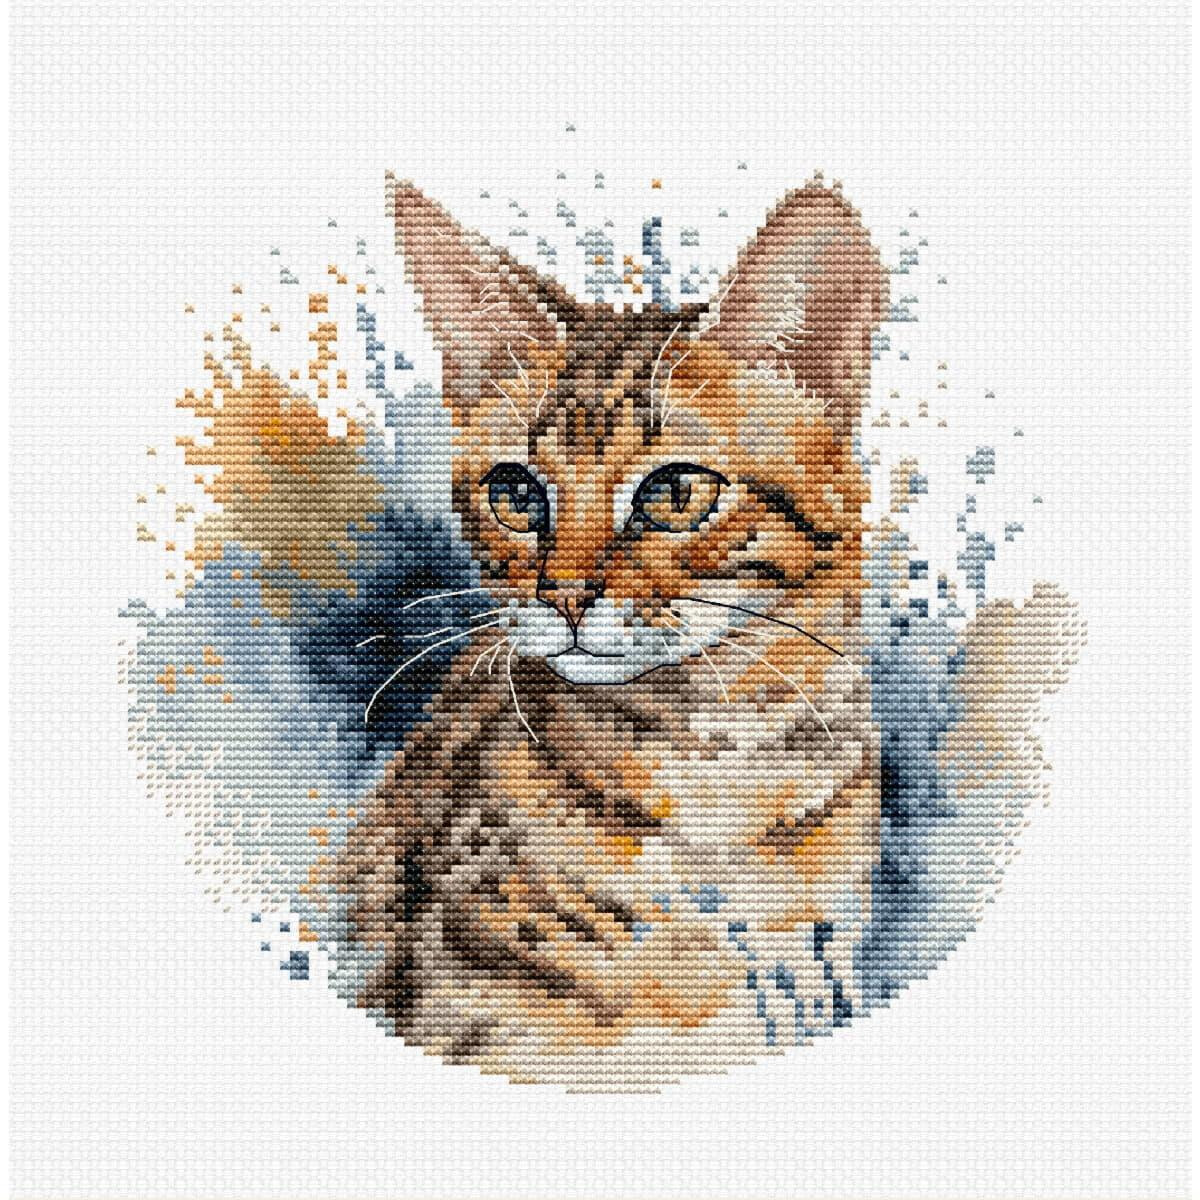 An embroidered artwork from a Luca-s embroidery pack...